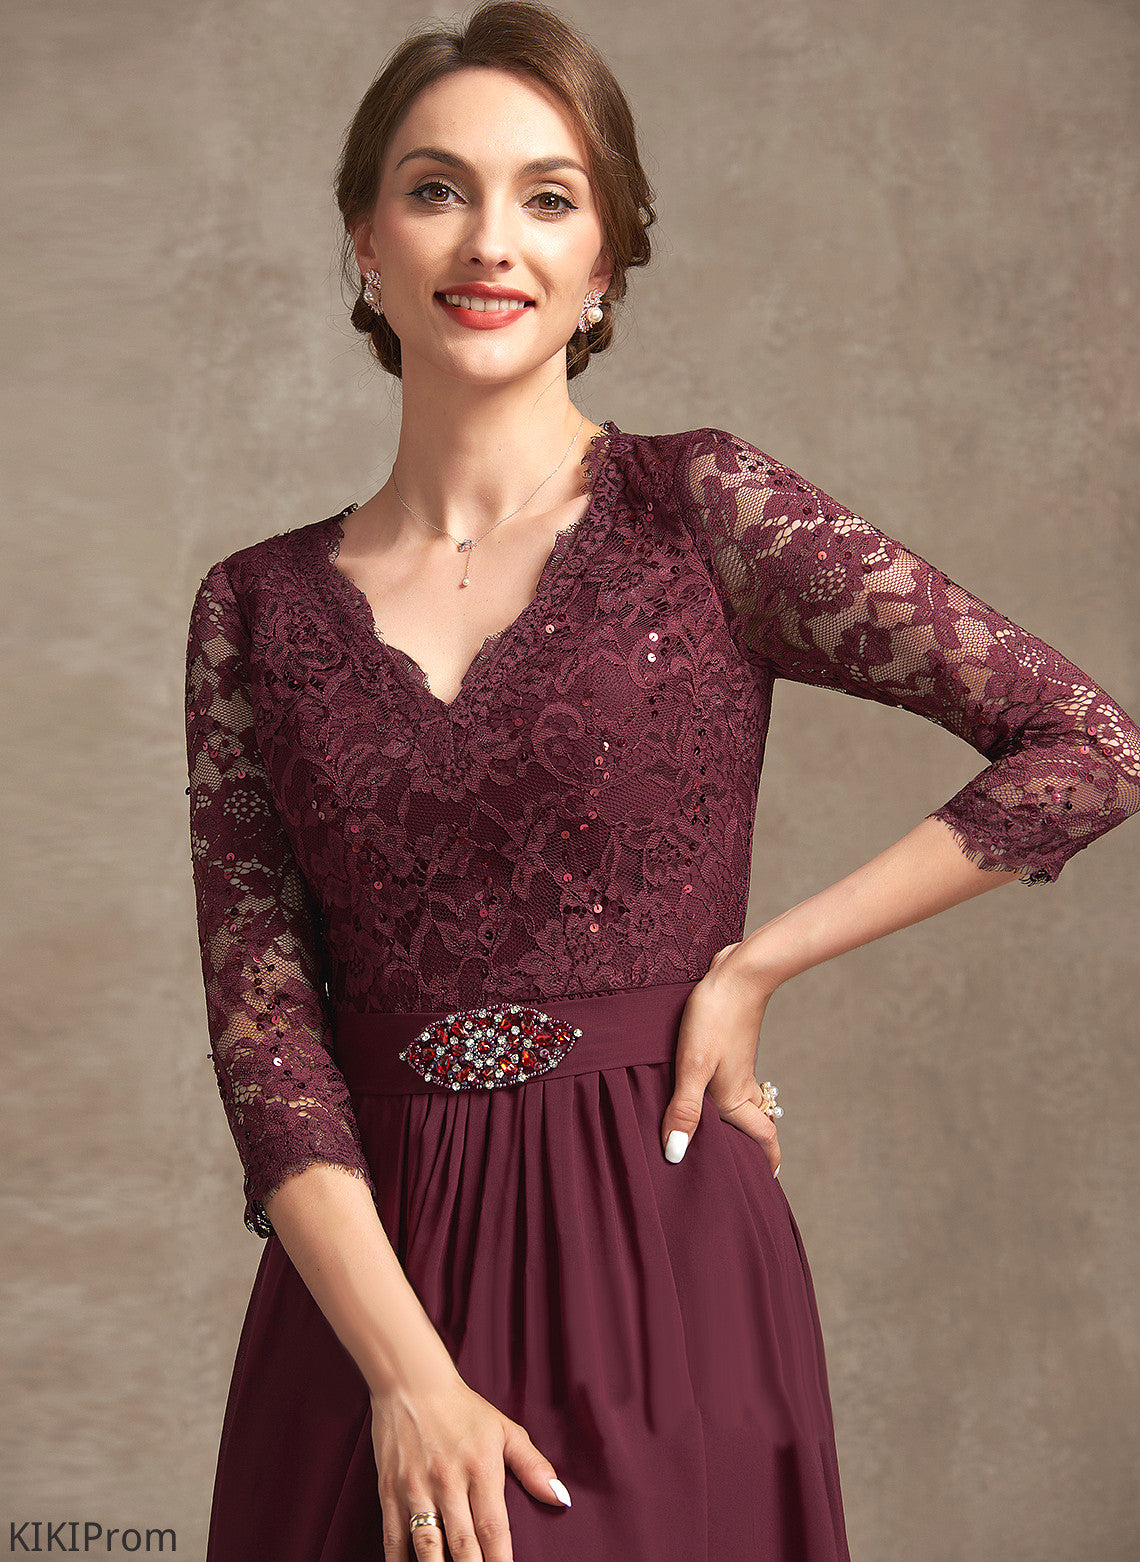 Lace Sequins V-neck Mother of the Bride Dresses Asymmetrical of With Bride A-Line Beading Dress the Chiffon Mother Susan